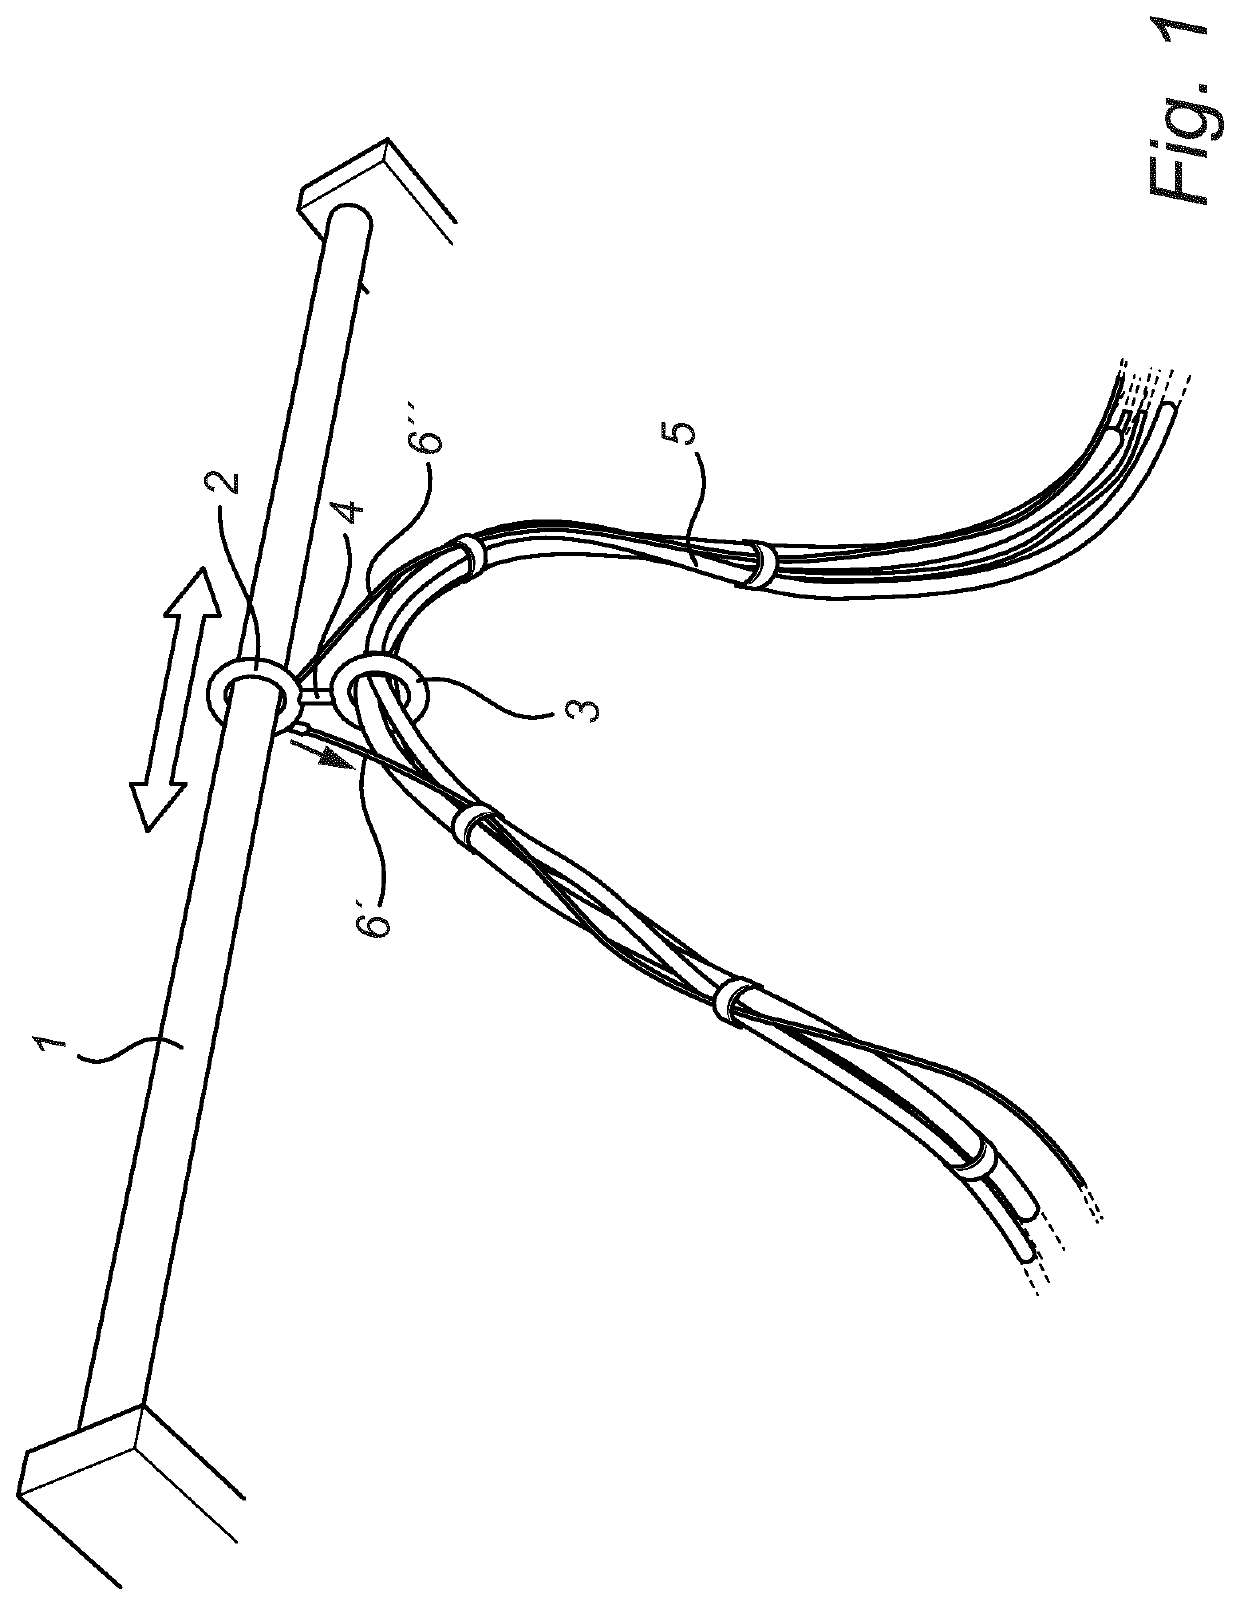 Suspension device for cables and tubings